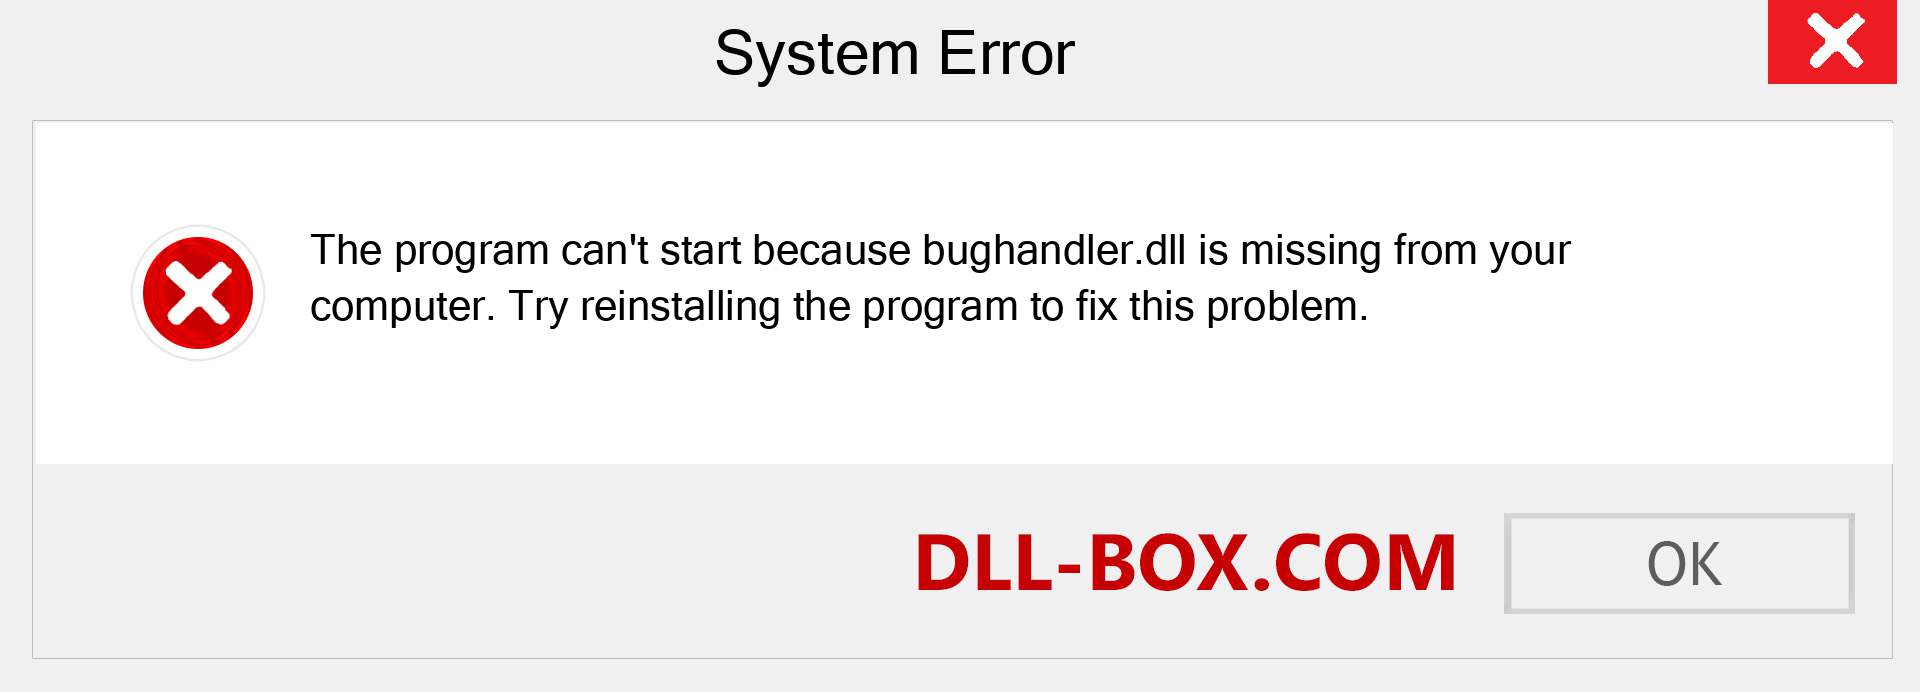  bughandler.dll file is missing?. Download for Windows 7, 8, 10 - Fix  bughandler dll Missing Error on Windows, photos, images